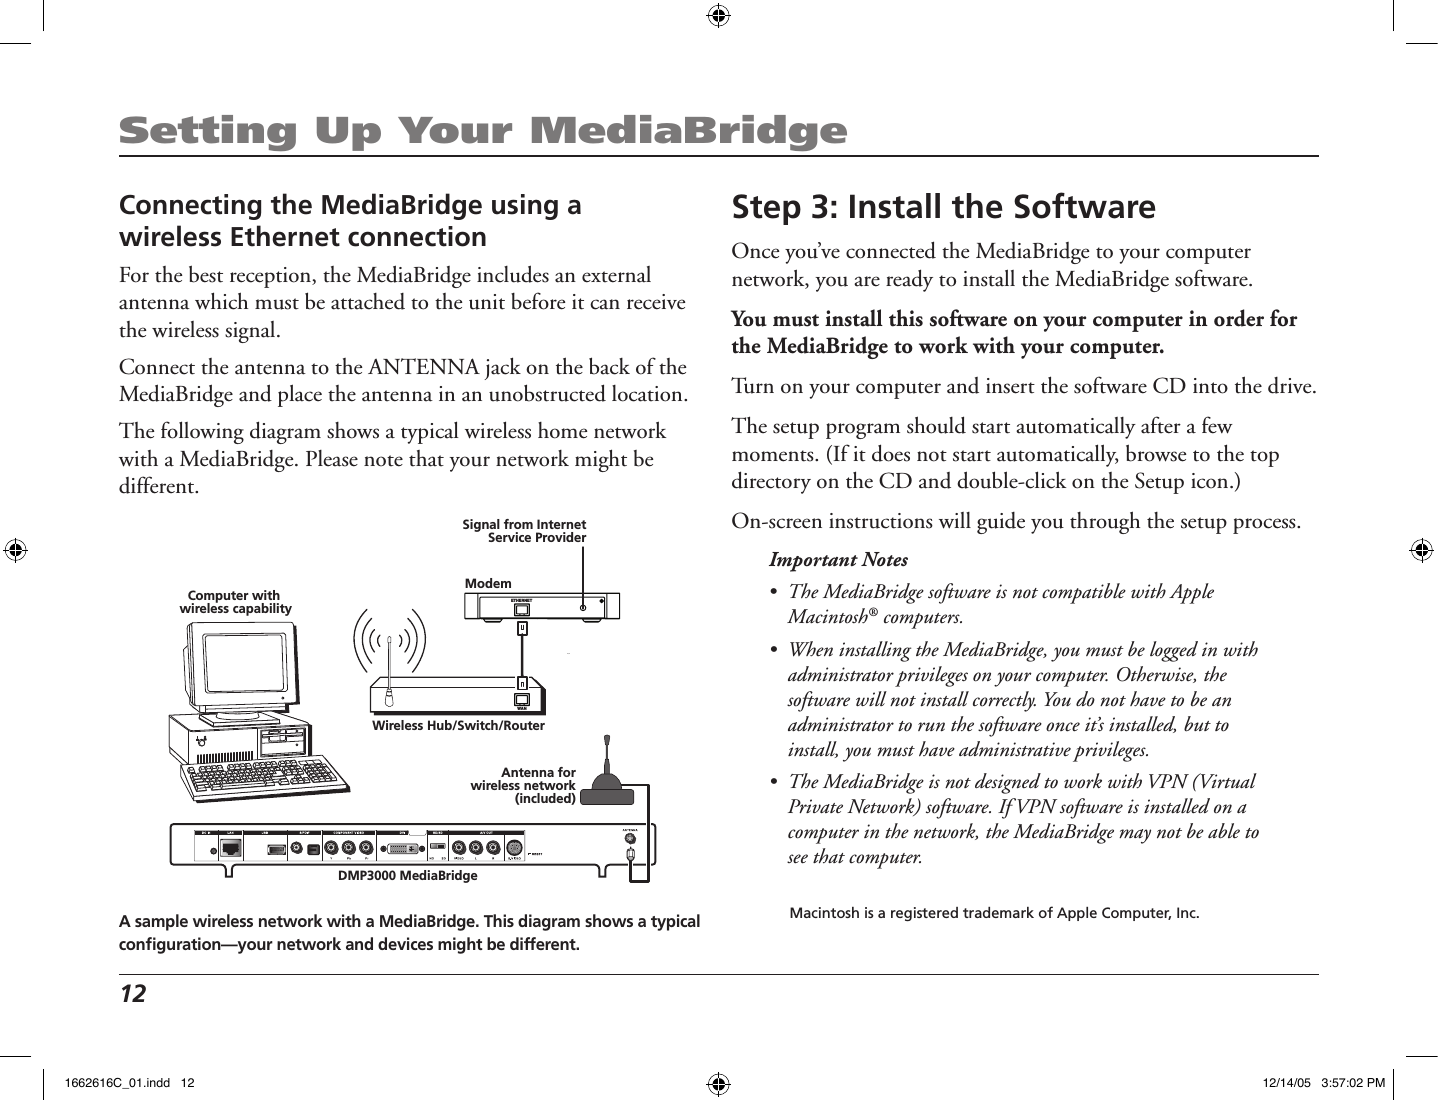 12 Setting Up Your MediaBridgeStep 3: Install the SoftwareOnce you’ve connected the MediaBridge to your computer network, you are ready to install the MediaBridge software. You must install this software on your computer in order for the MediaBridge to work with your computer. Turn on your computer and insert the software CD into the drive. The setup program should start automatically after a few moments. (If it does not start automatically, browse to the top directory on the CD and double-click on the Setup icon.)On-screen instructions will guide you through the setup process.Important Notes •  The MediaBridge software is not compatible with Apple Macintosh® computers.•  When installing the MediaBridge, you must be logged in with administrator privileges on your computer. Otherwise, the software will not install correctly. You do not have to be an administrator to run the software once it’s installed, but to install, you must have administrative privileges.•  The MediaBridge is not designed to work with VPN (Virtual Private Network) software. If VPN software is installed on a computer in the network, the MediaBridge may not be able to see that computer.  Macintosh is a registered trademark of Apple Computer, Inc.Connecting the MediaBridge using a  wireless Ethernet connectionFor the best reception, the MediaBridge includes an external antenna which must be attached to the unit before it can receive the wireless signal.  Connect the antenna to the ANTENNA jack on the back of the MediaBridge and place the antenna in an unobstructed location.The following diagram shows a typical wireless home network with a MediaBridge. Please note that your network might be different.DMP3000 MediaBridgeWireless Hub/Switch/Router   WAN   ETHERNETModemSignal from InternetService ProviderComputer with wireless capabilityAntenna forwireless network(included)A sample wireless network with a MediaBridge. This diagram shows a typical conﬁguration—your network and devices might be different.1662616C_01.indd   12 12/14/05   3:57:02 PM